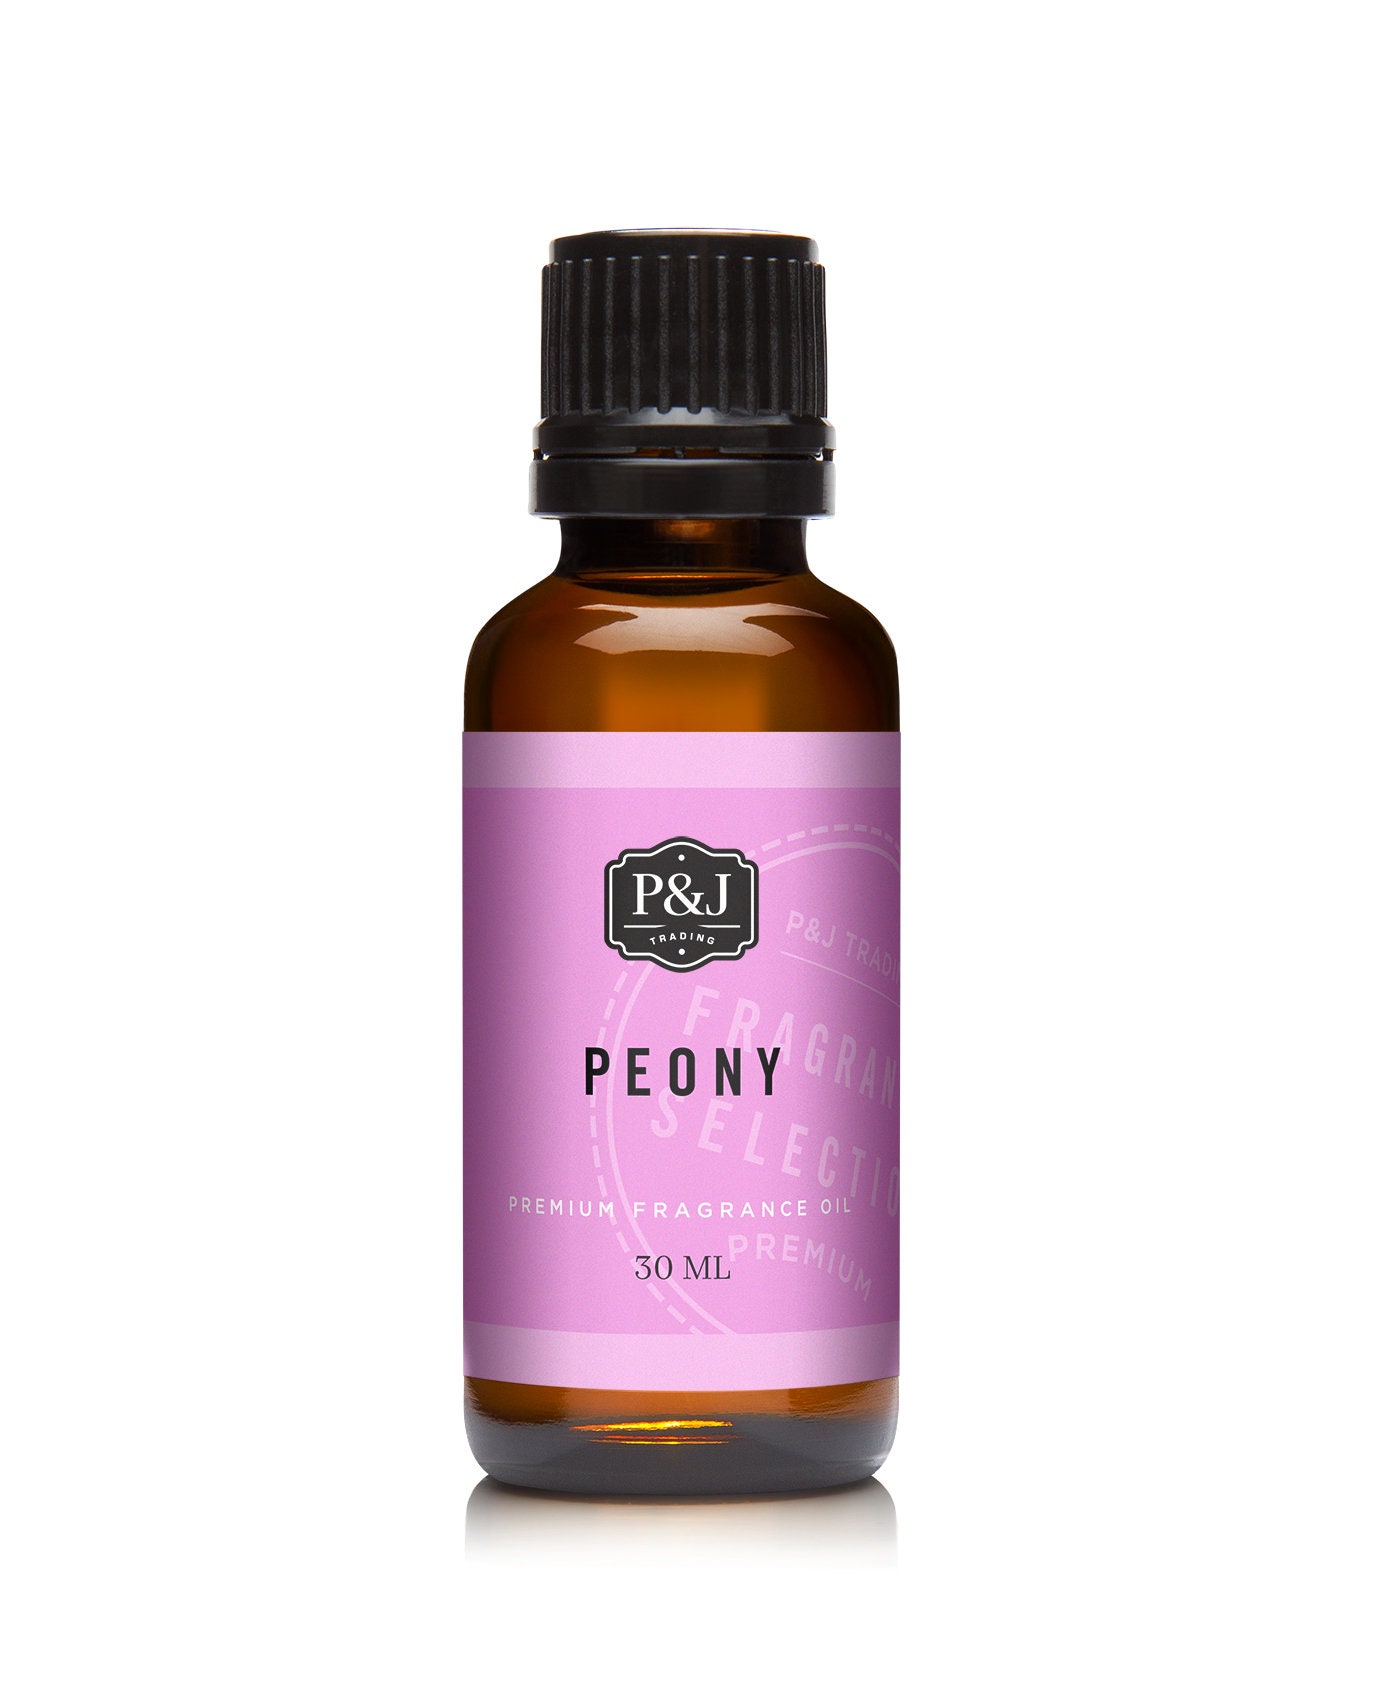 Yetious Peony Essential Oil 100% Pure for Diffusers Organic Aromatherapy  10ml 